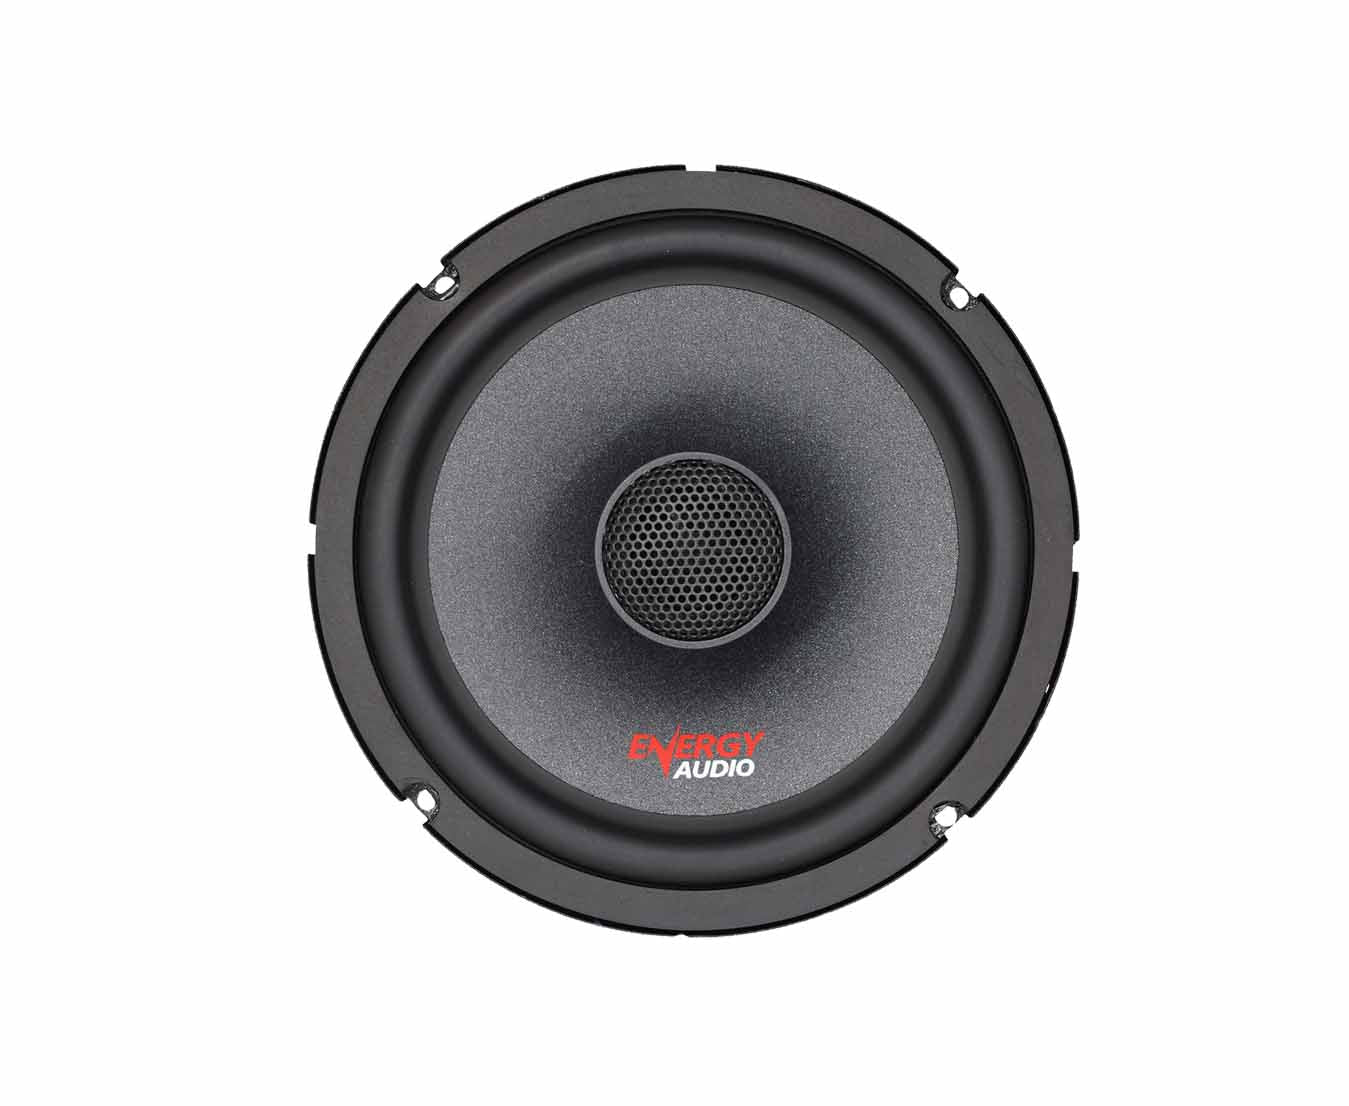 Energy Audio SQ652 375W 2-Way 70W RMS Coaxial 6.5" Speakers (Free Delivery Excluded)